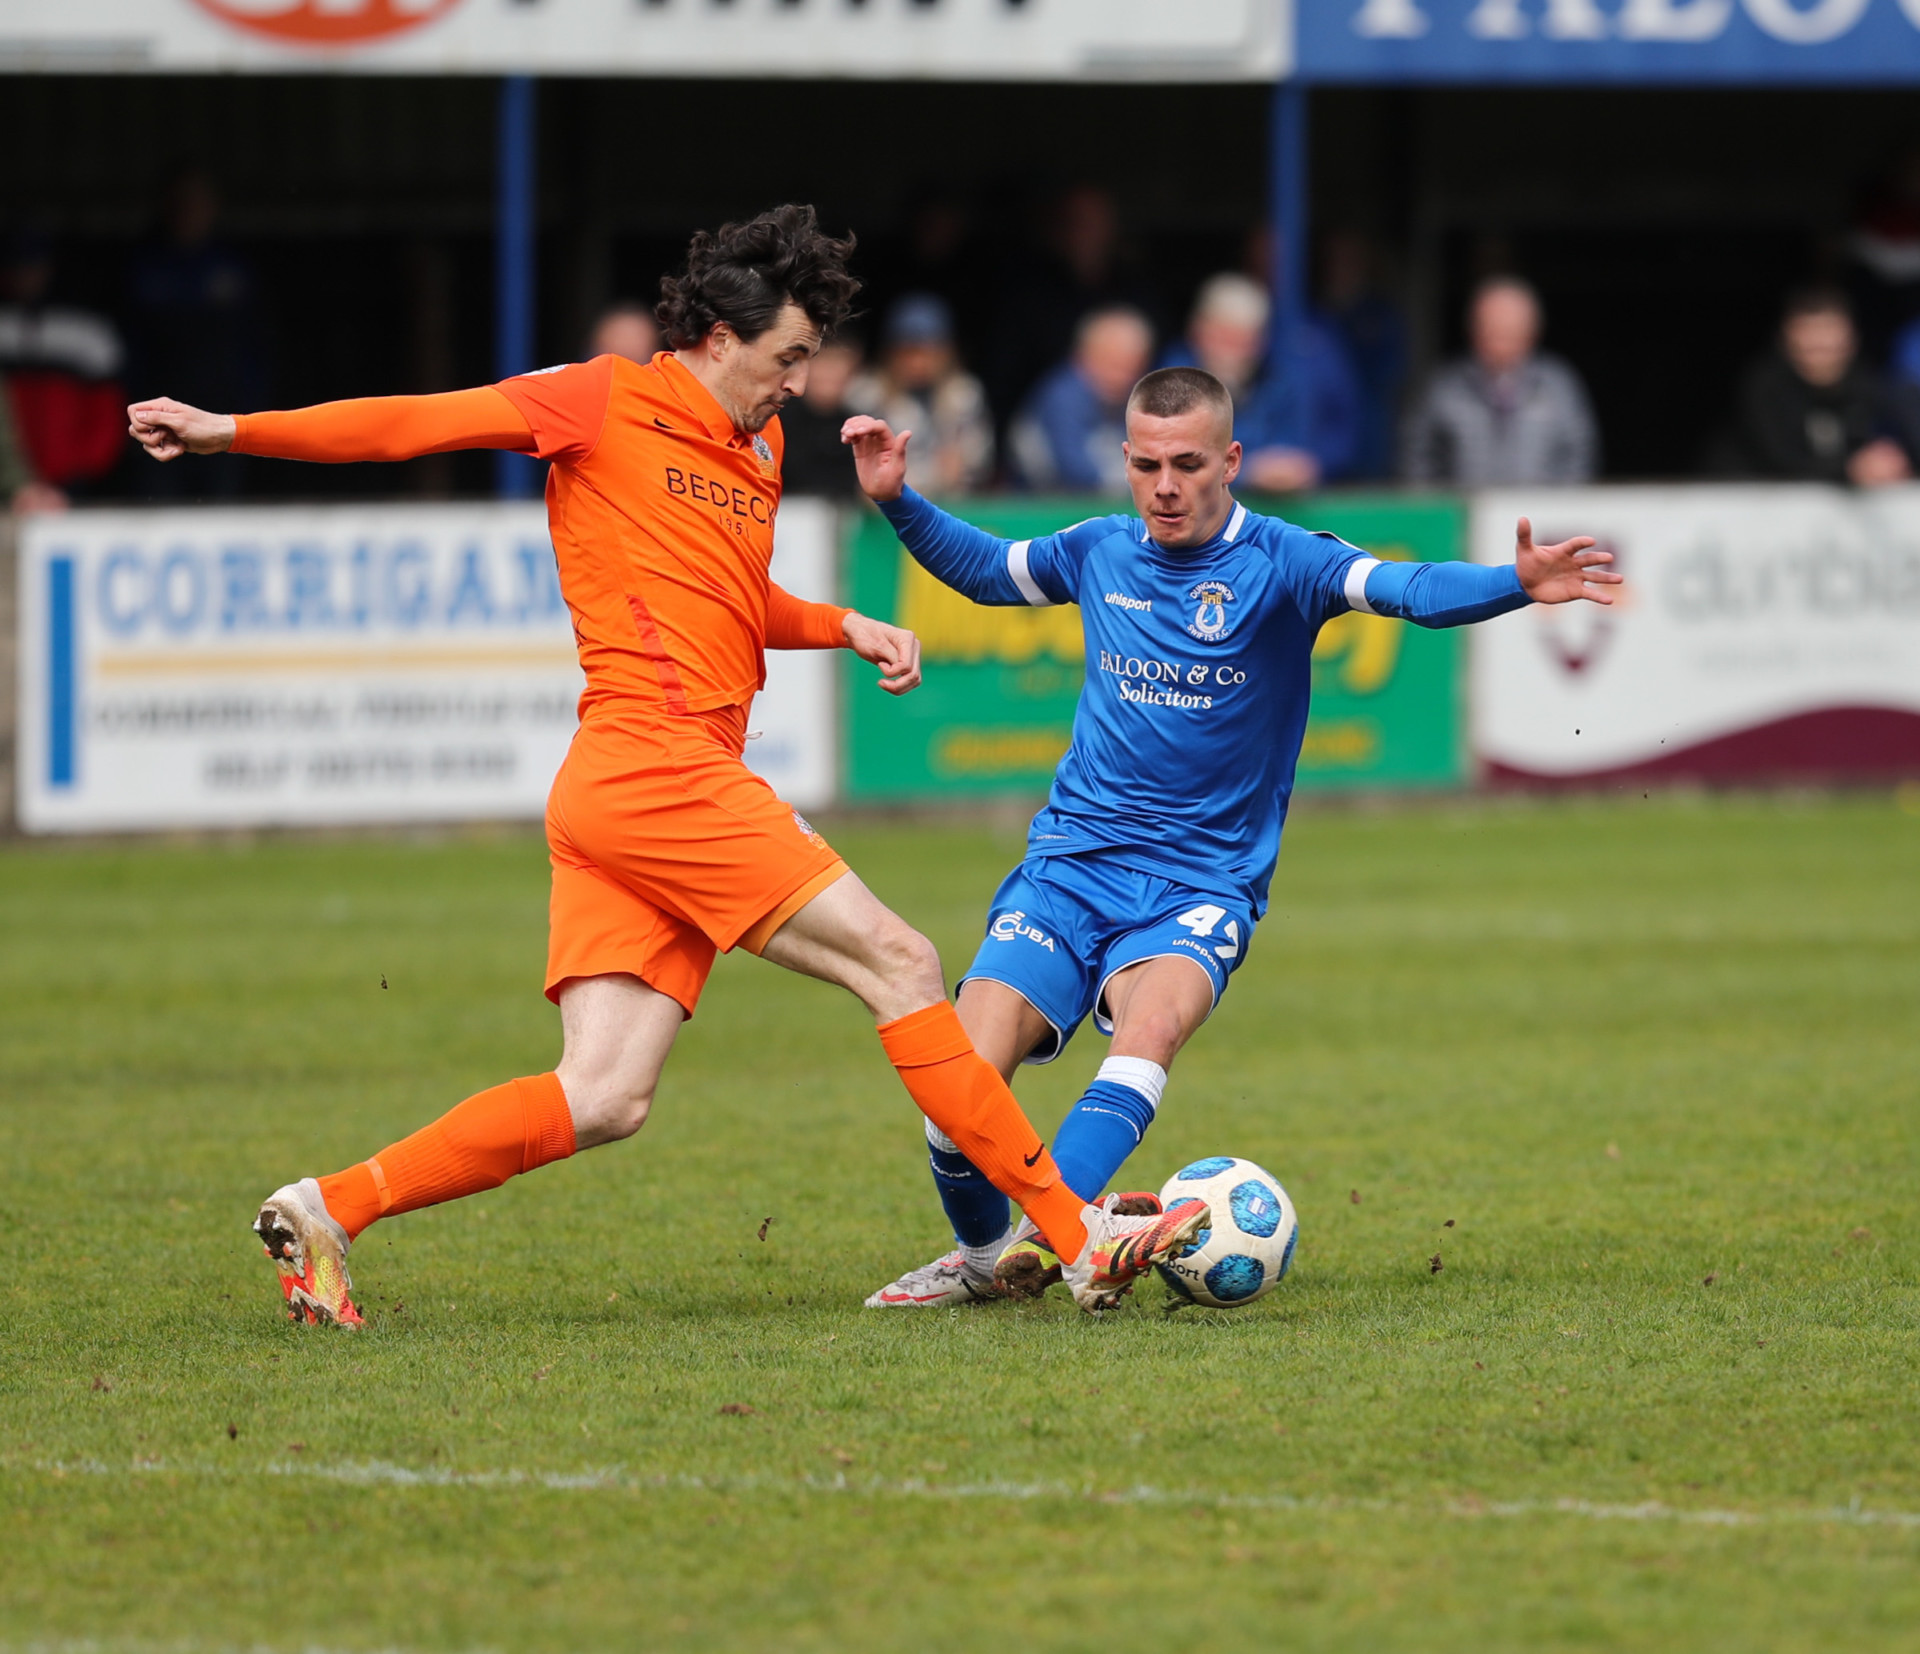 Swifts edge closer to securing top flight status